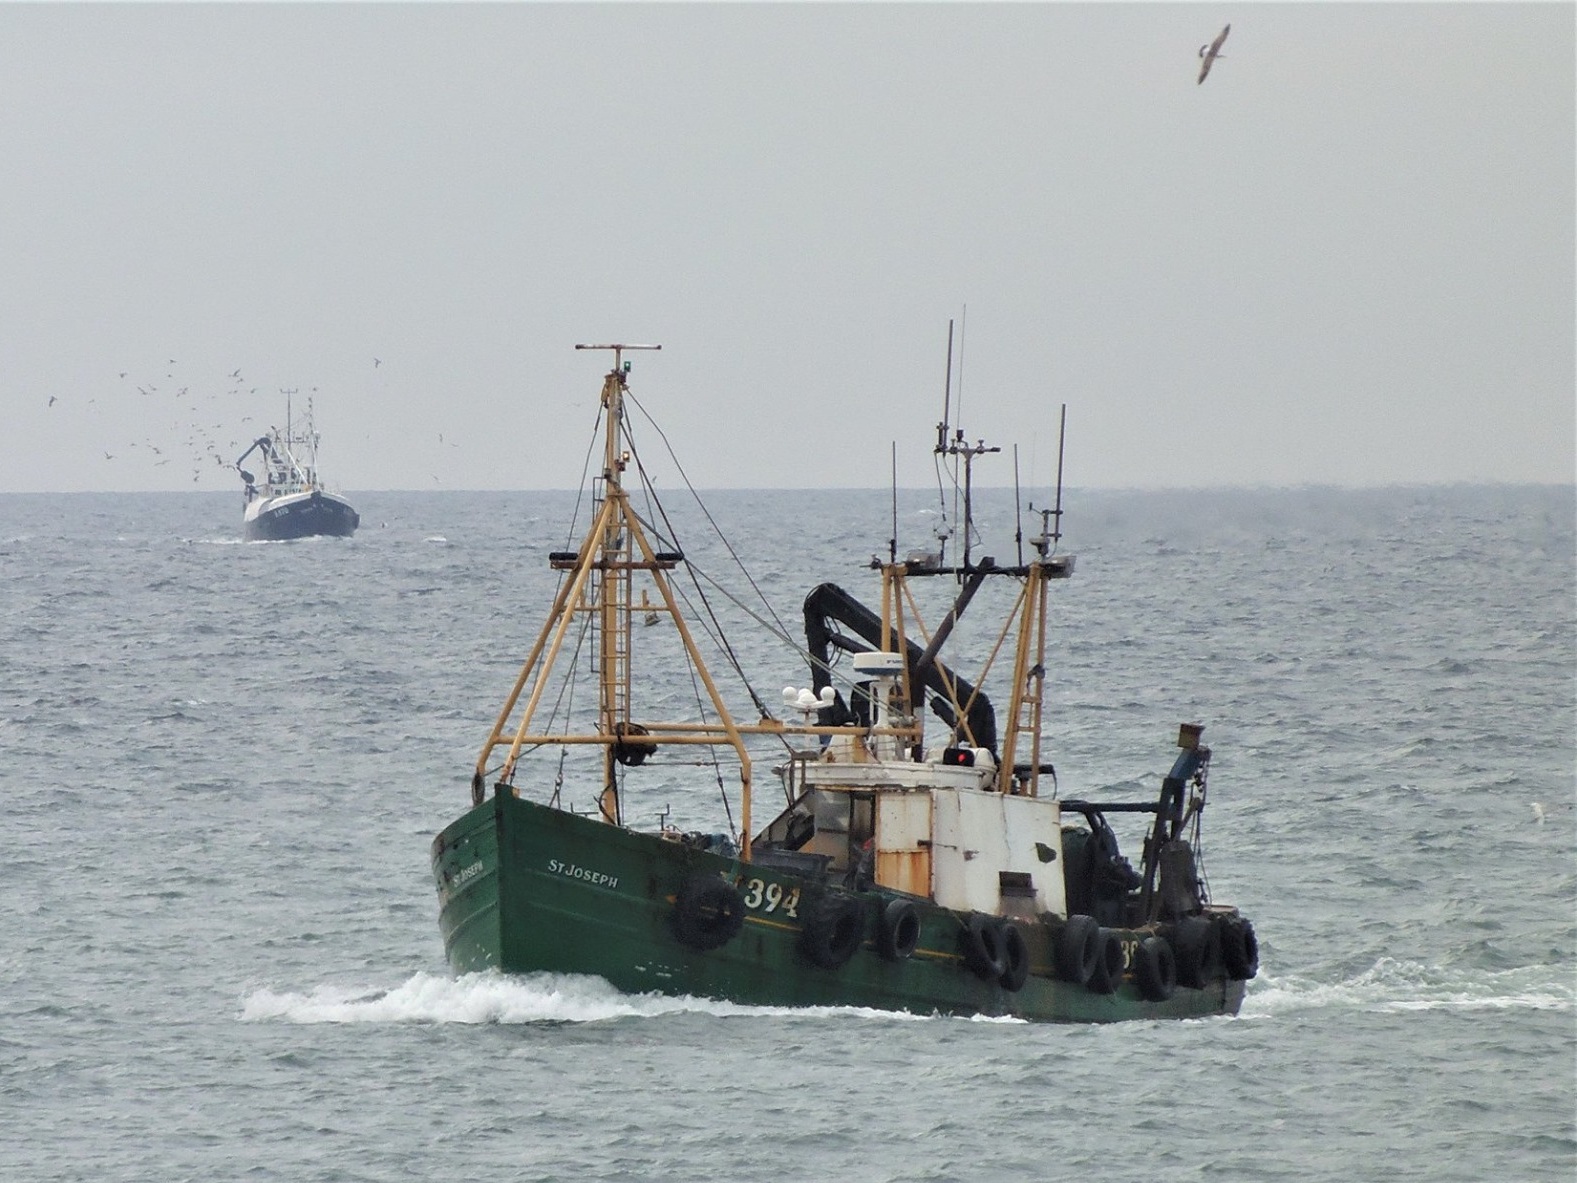 ST JOSEPH N394Tipo: Wooden Hull TrawlerSize: 16.49mBuilt: 1967; Anstruther